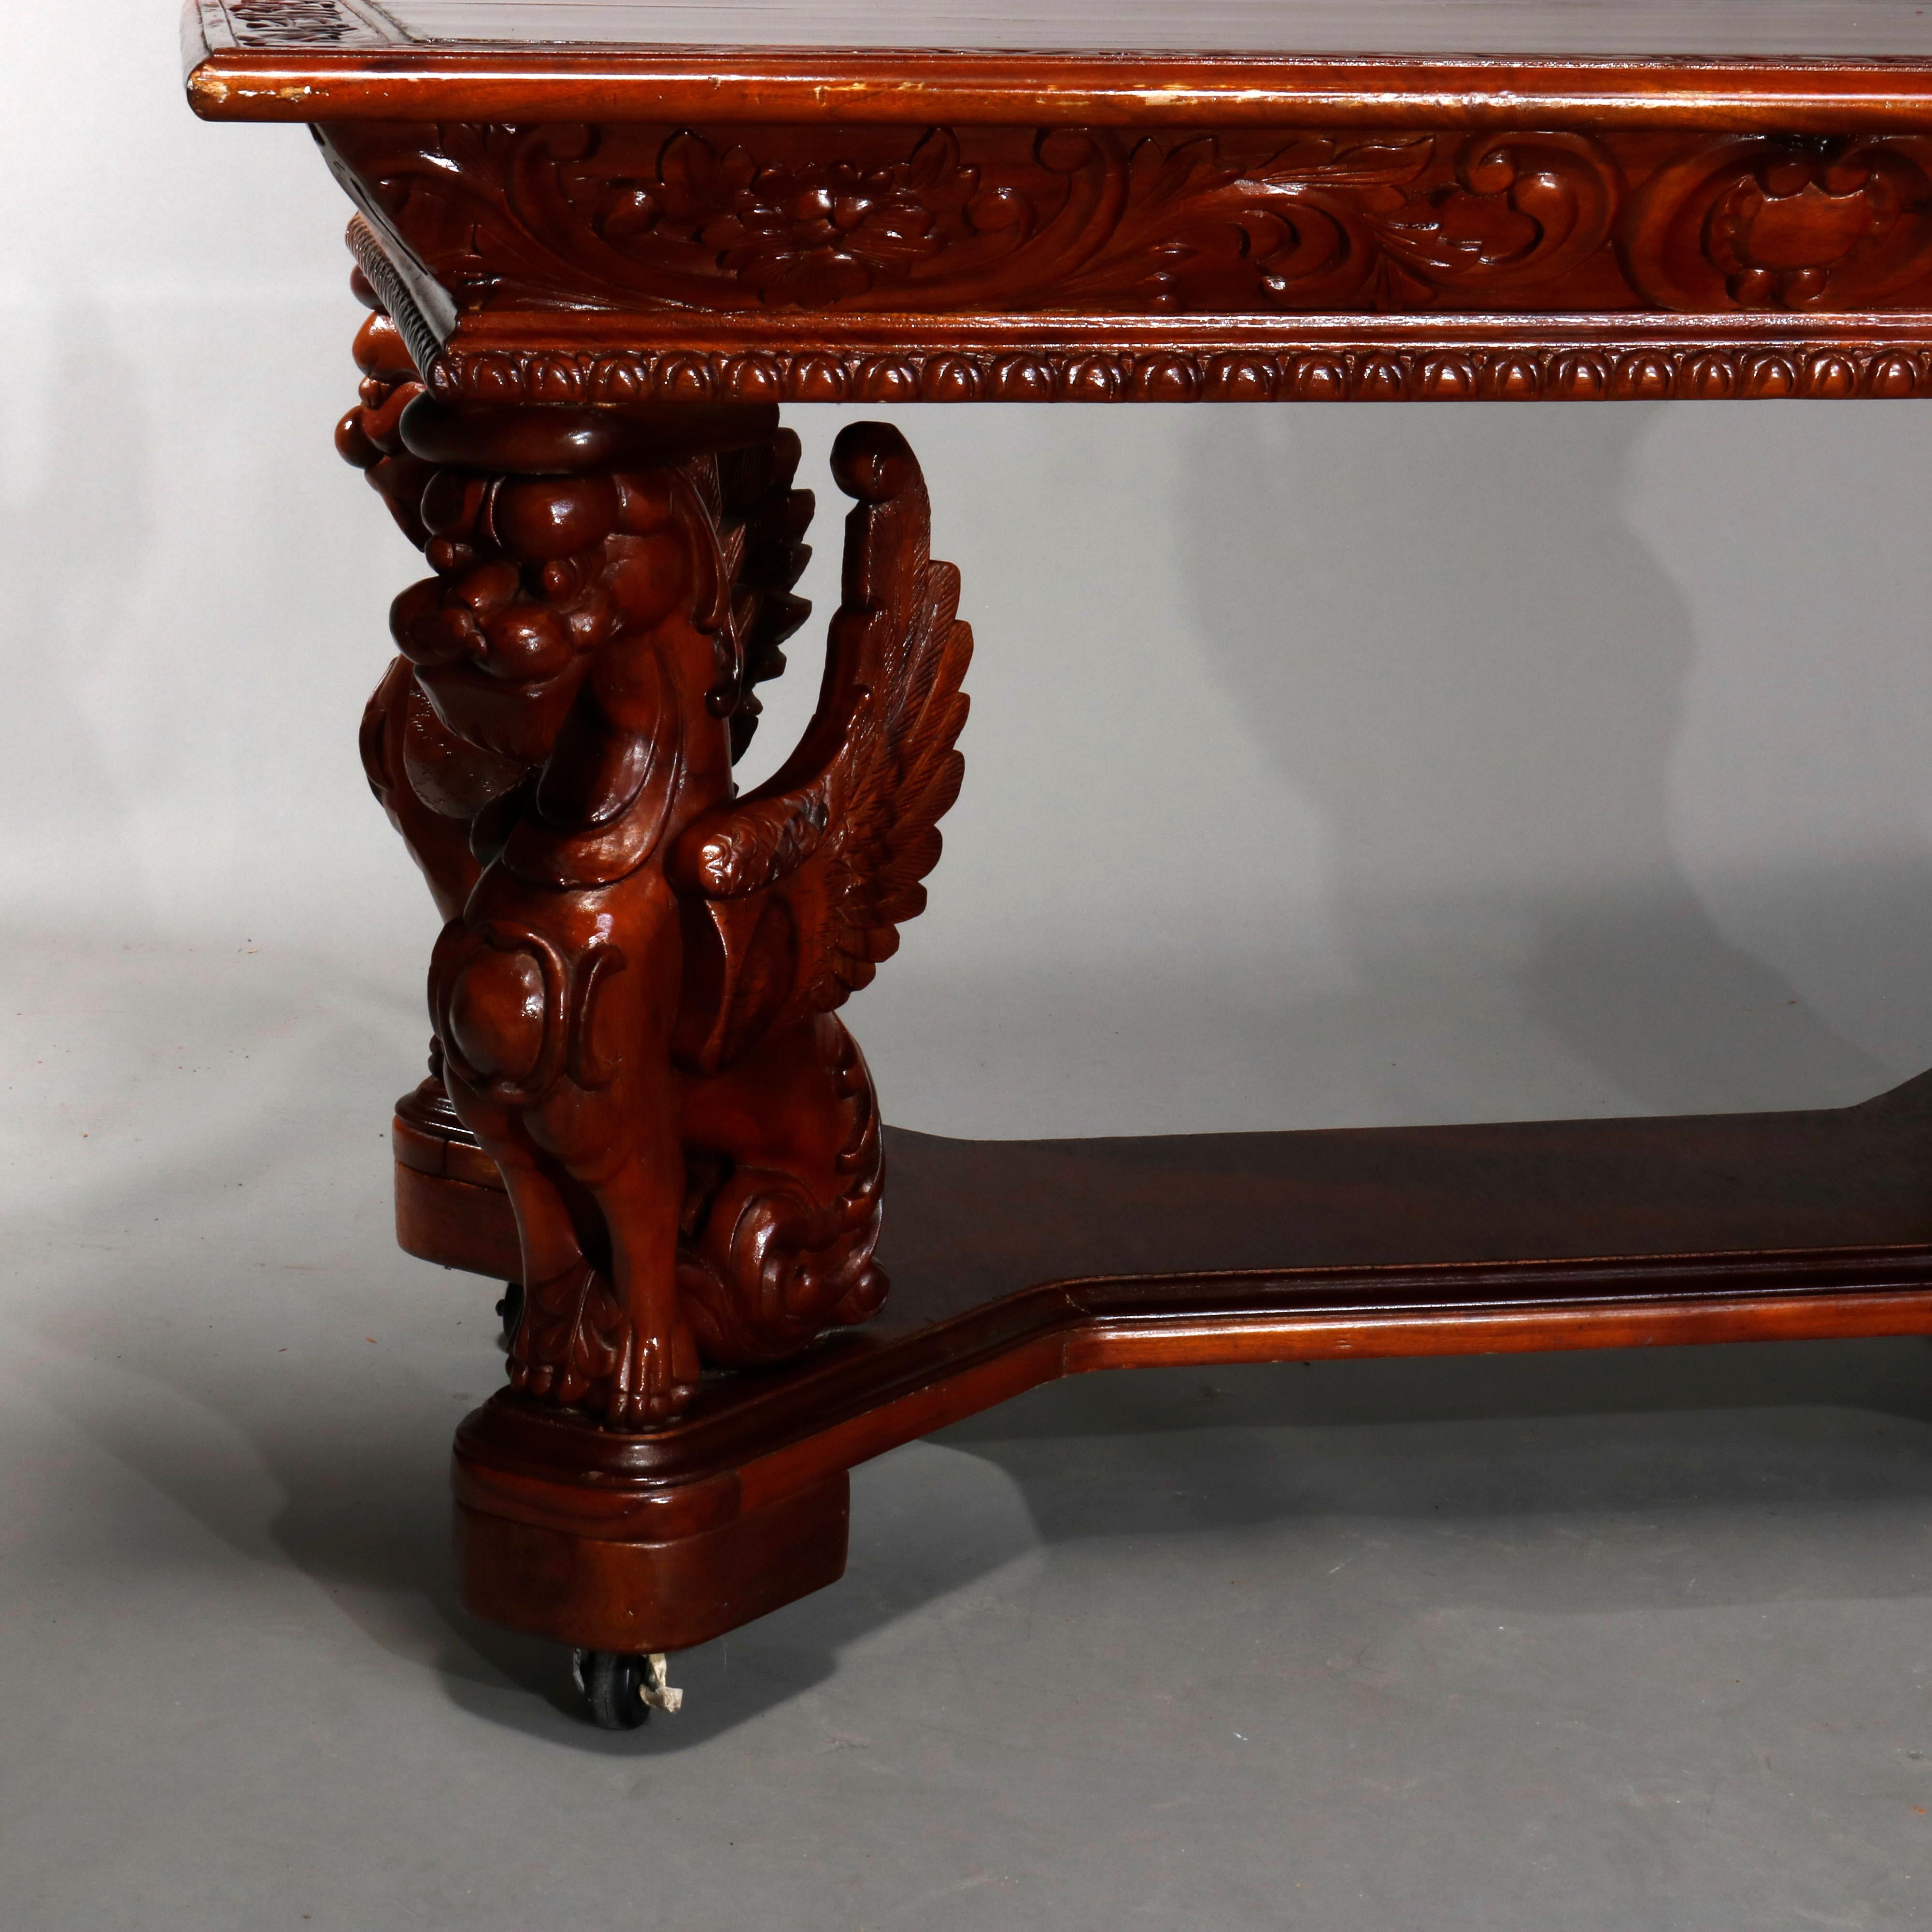 An antique Gothic figural library table offers mahogany construction with top having carved foliate bordering, deep skirt and raised on full sculptural griffin form legs with shaped lower shelf, 20th century
  

Measures: 32